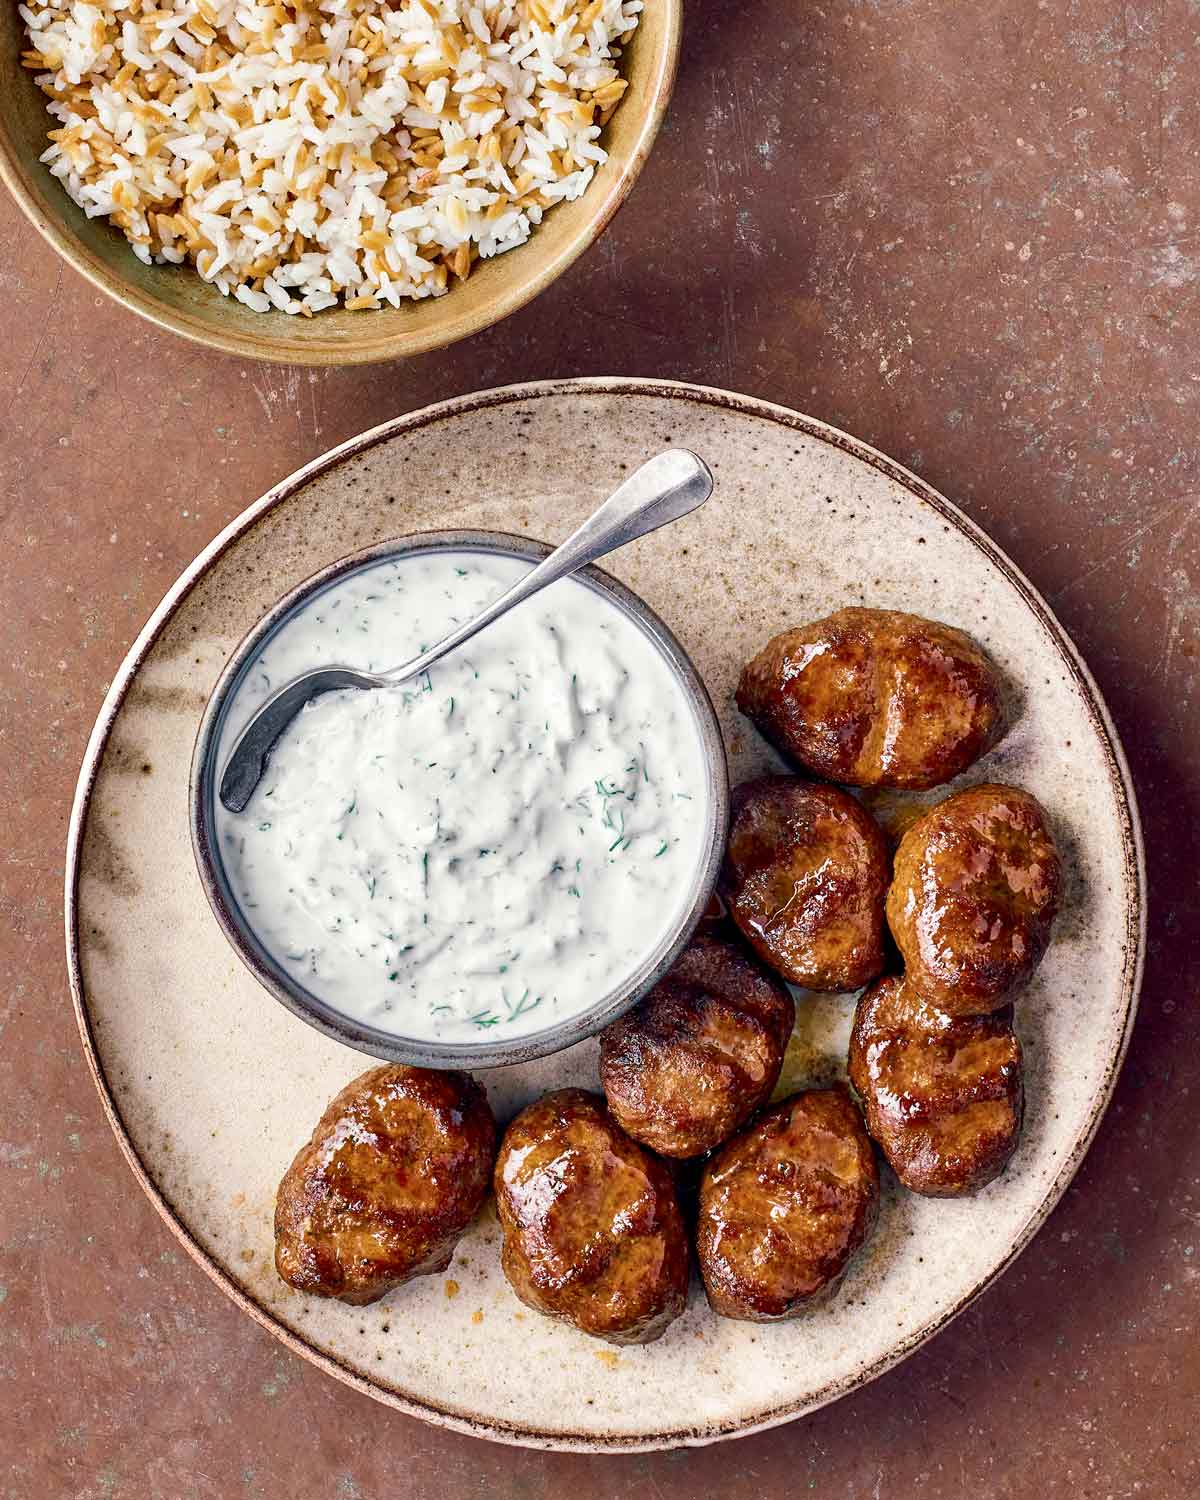 Eight kafta, or spiced kebabs, on a plate with a bowl of preserved lemon yogurt next to it and a bowl of rice beside it.